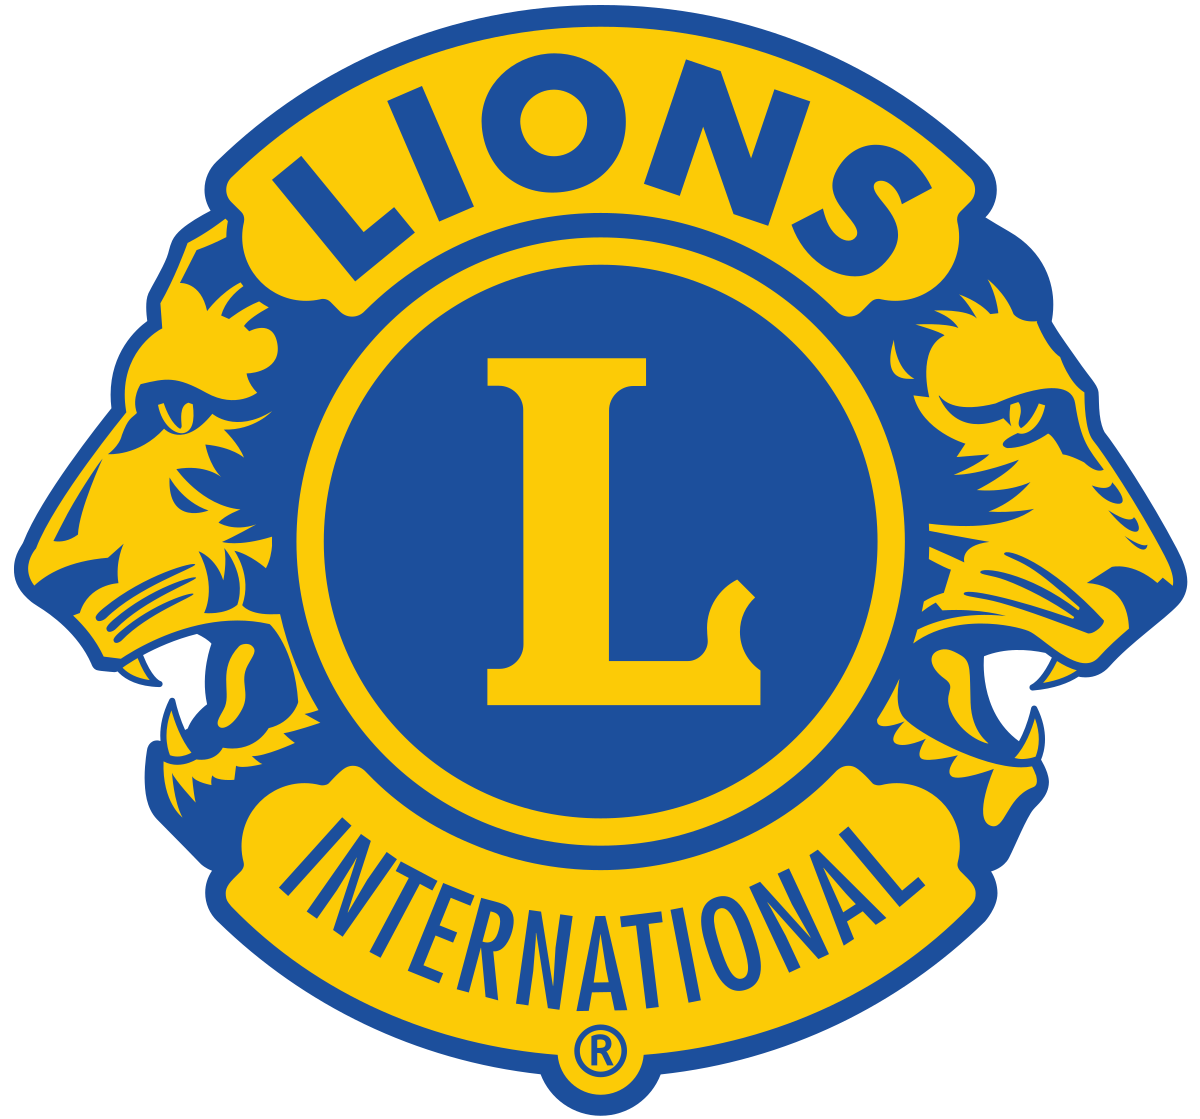 Stirling and District Lions Club